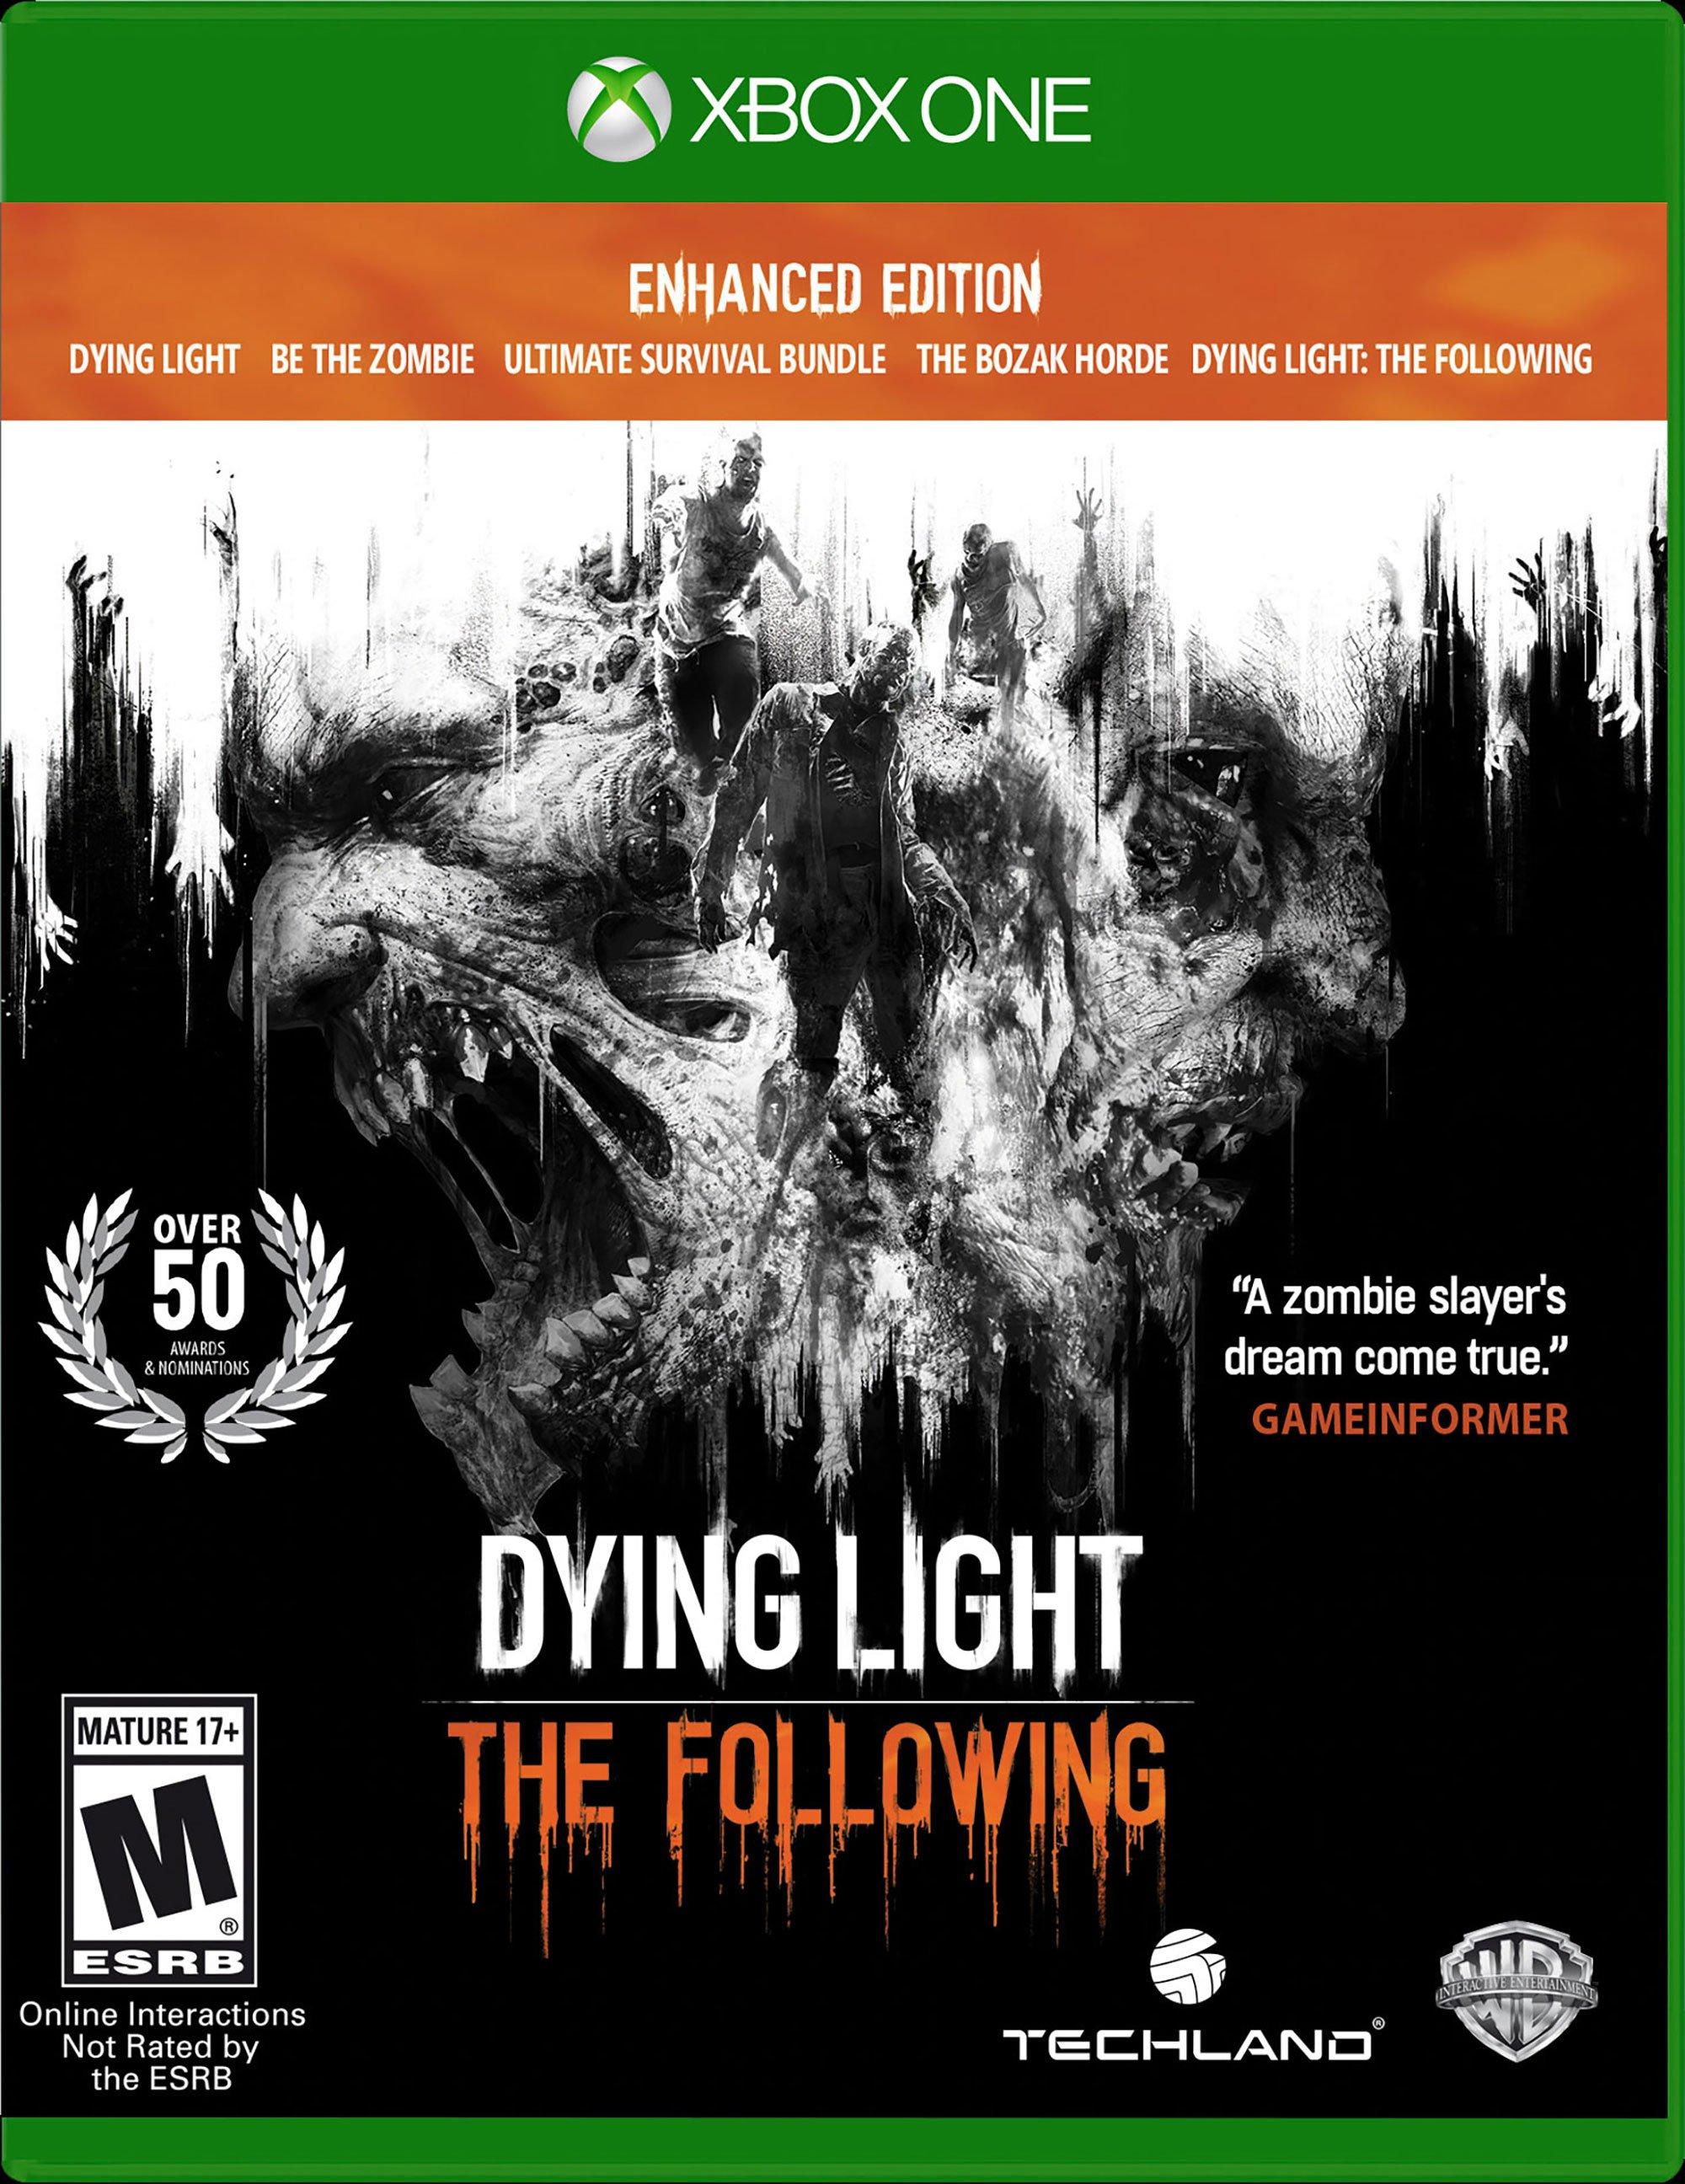 Dying Light: Definitive Edition announced for Switch